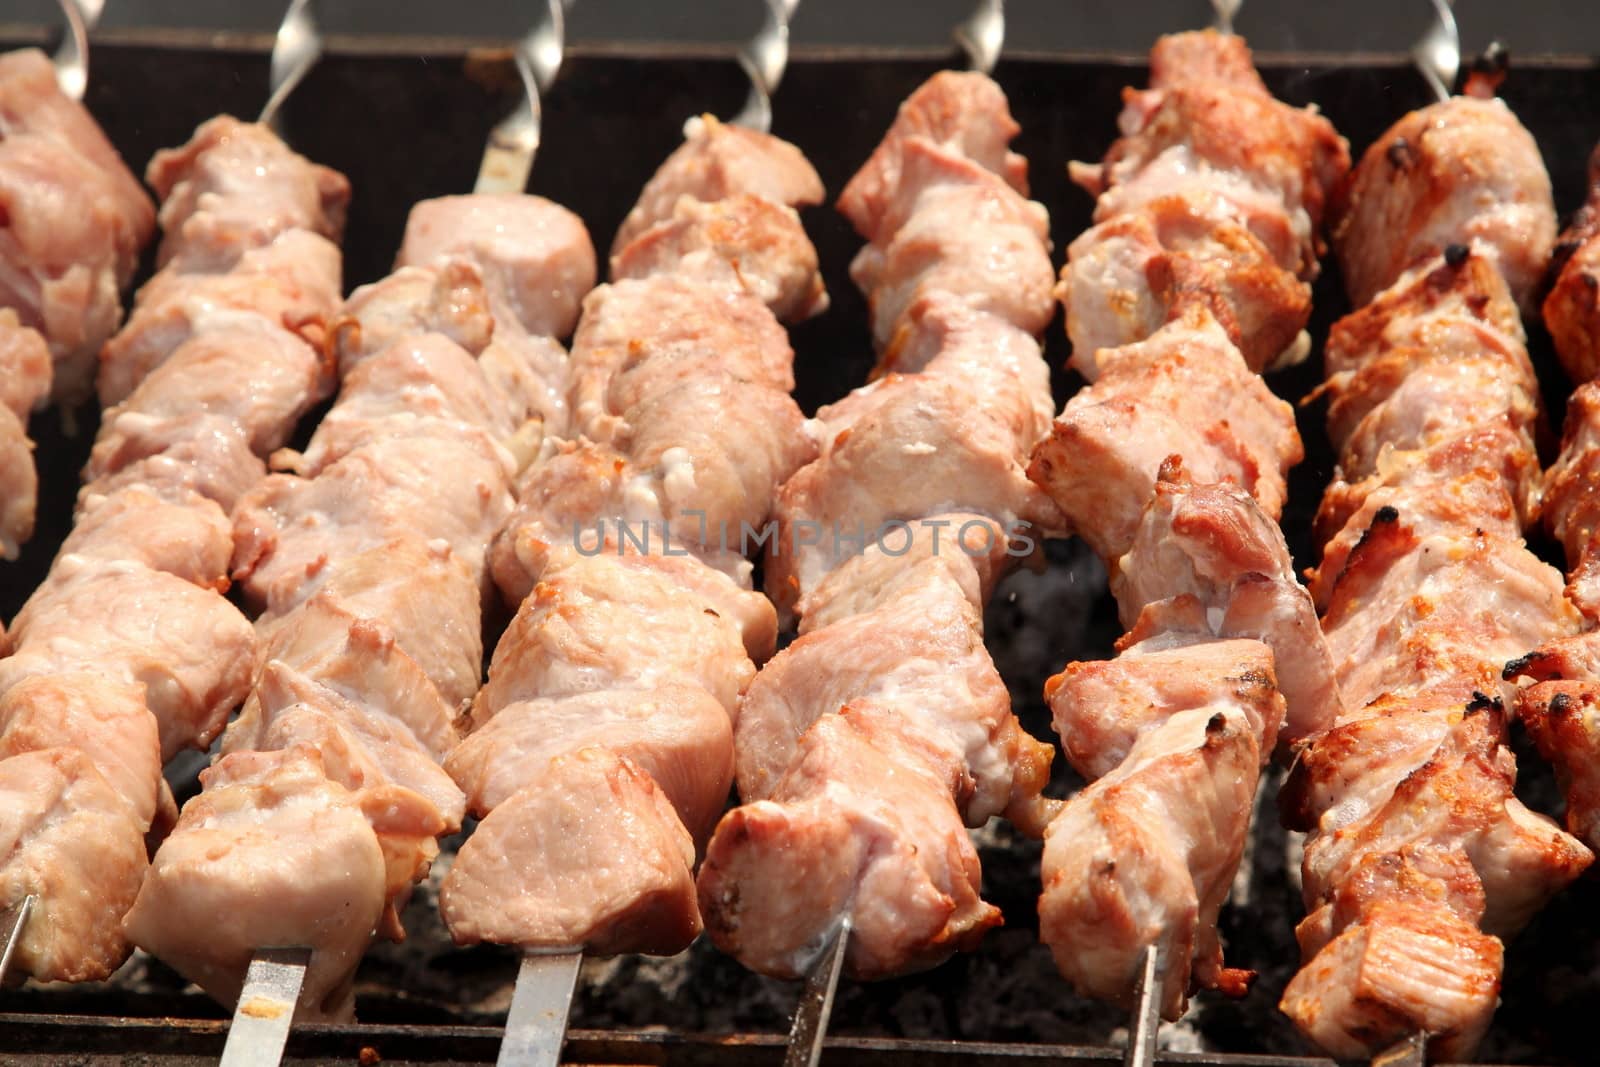 beef skewers cooked on the barbecue by indigolotos